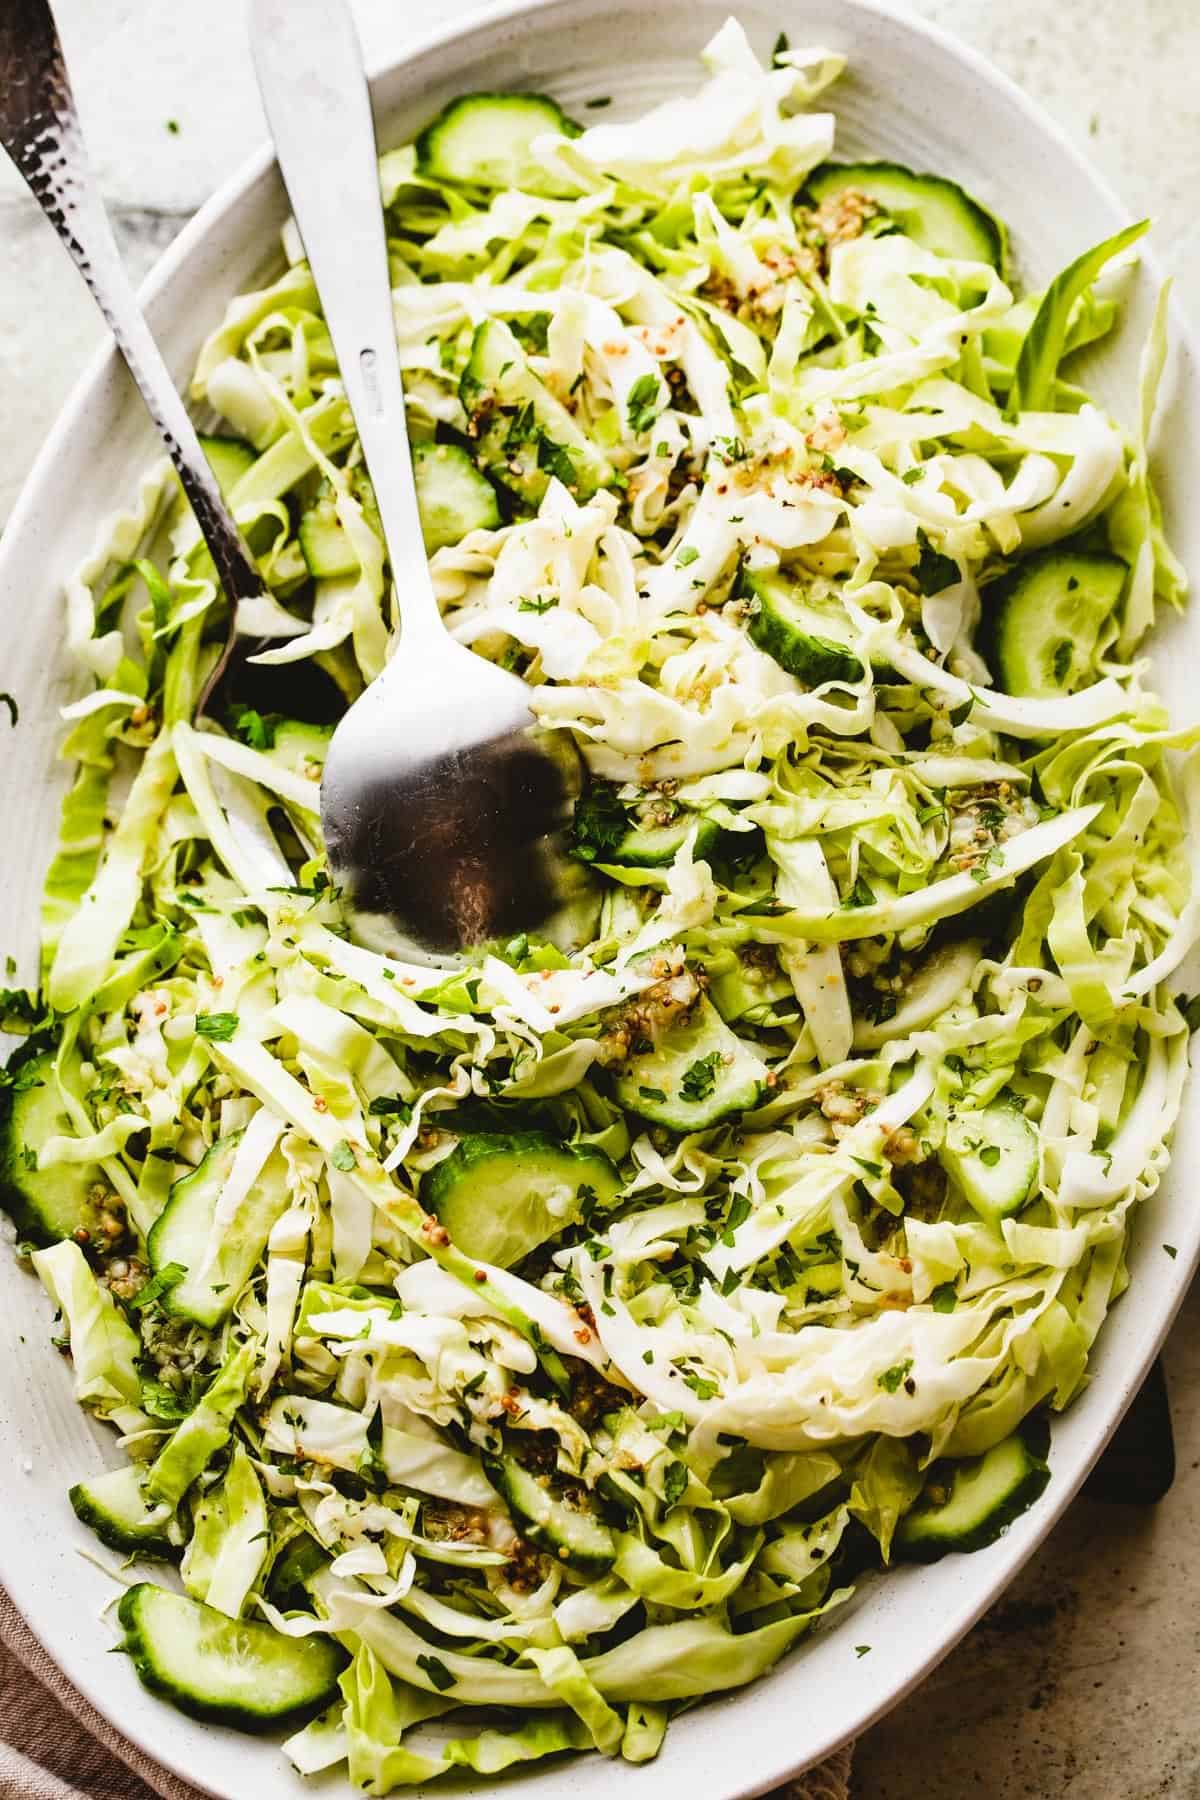 Cabbage Cucumber Salad served on an oblong serving plate with a large fork and spoon placed in the center of the salad.